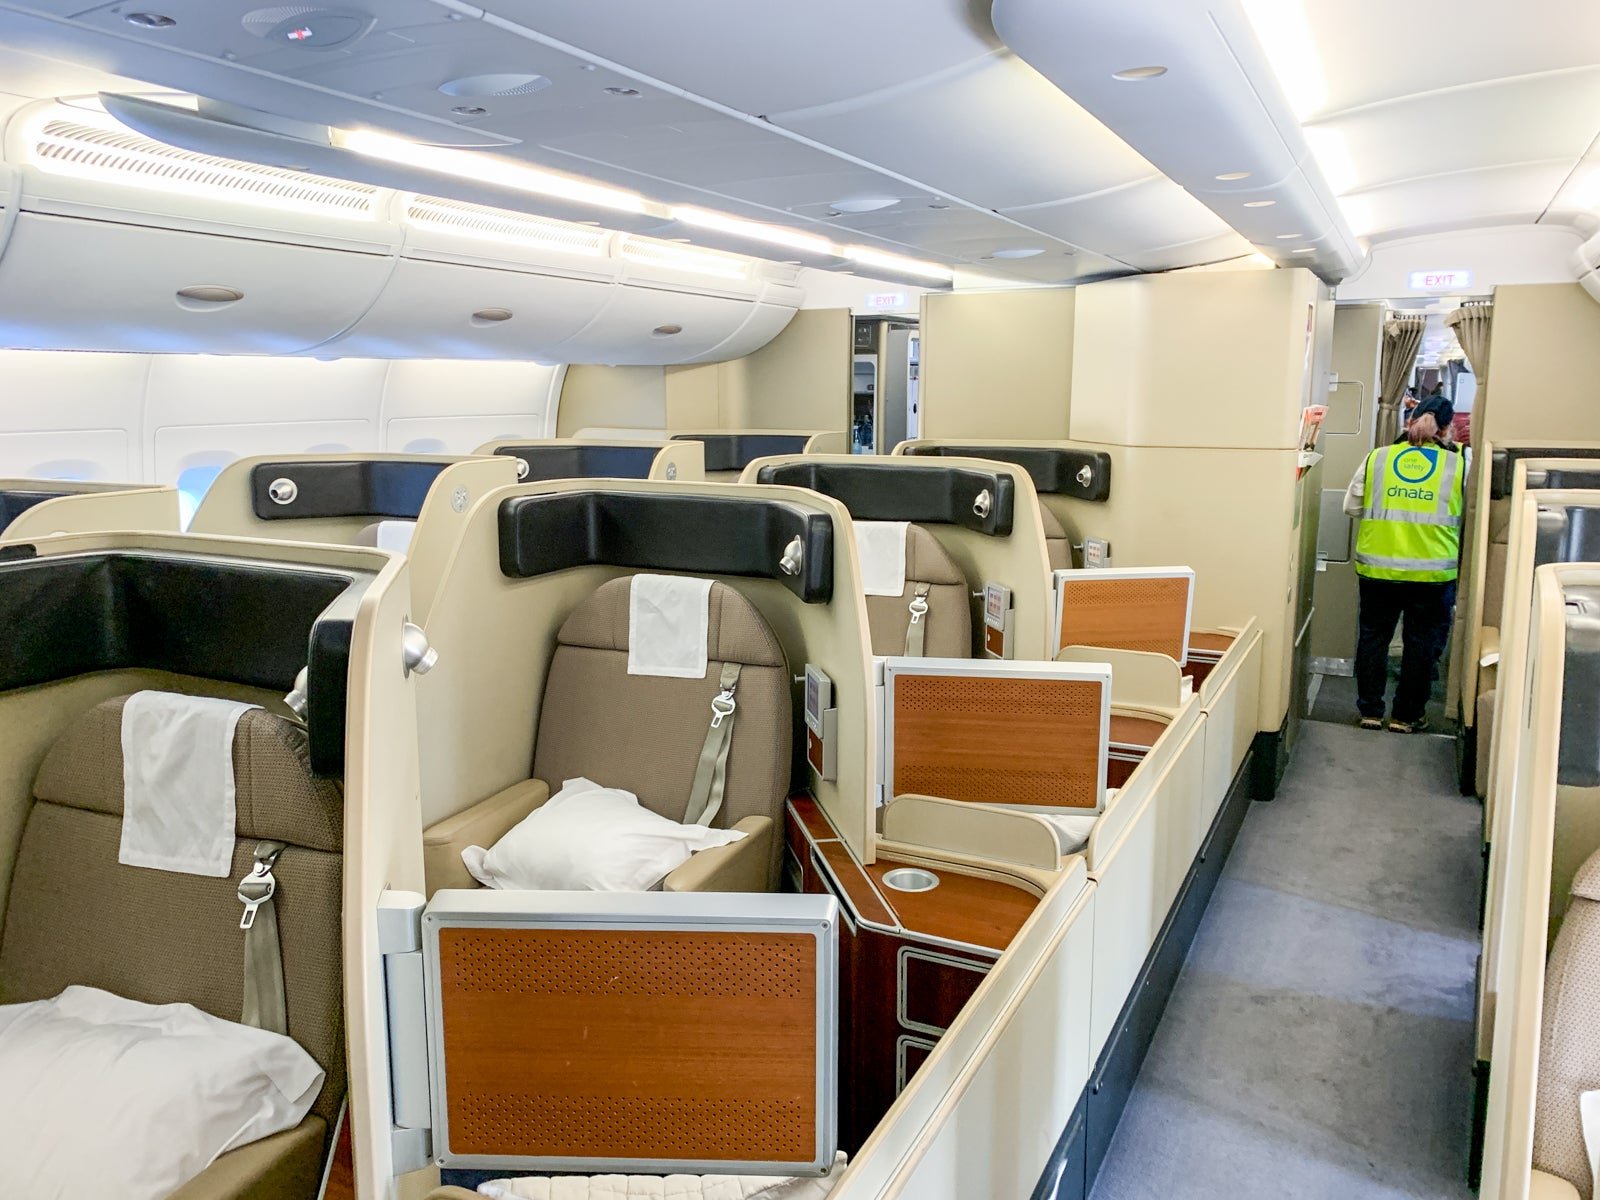 These airlines have stopped offering first class due to the pandemic